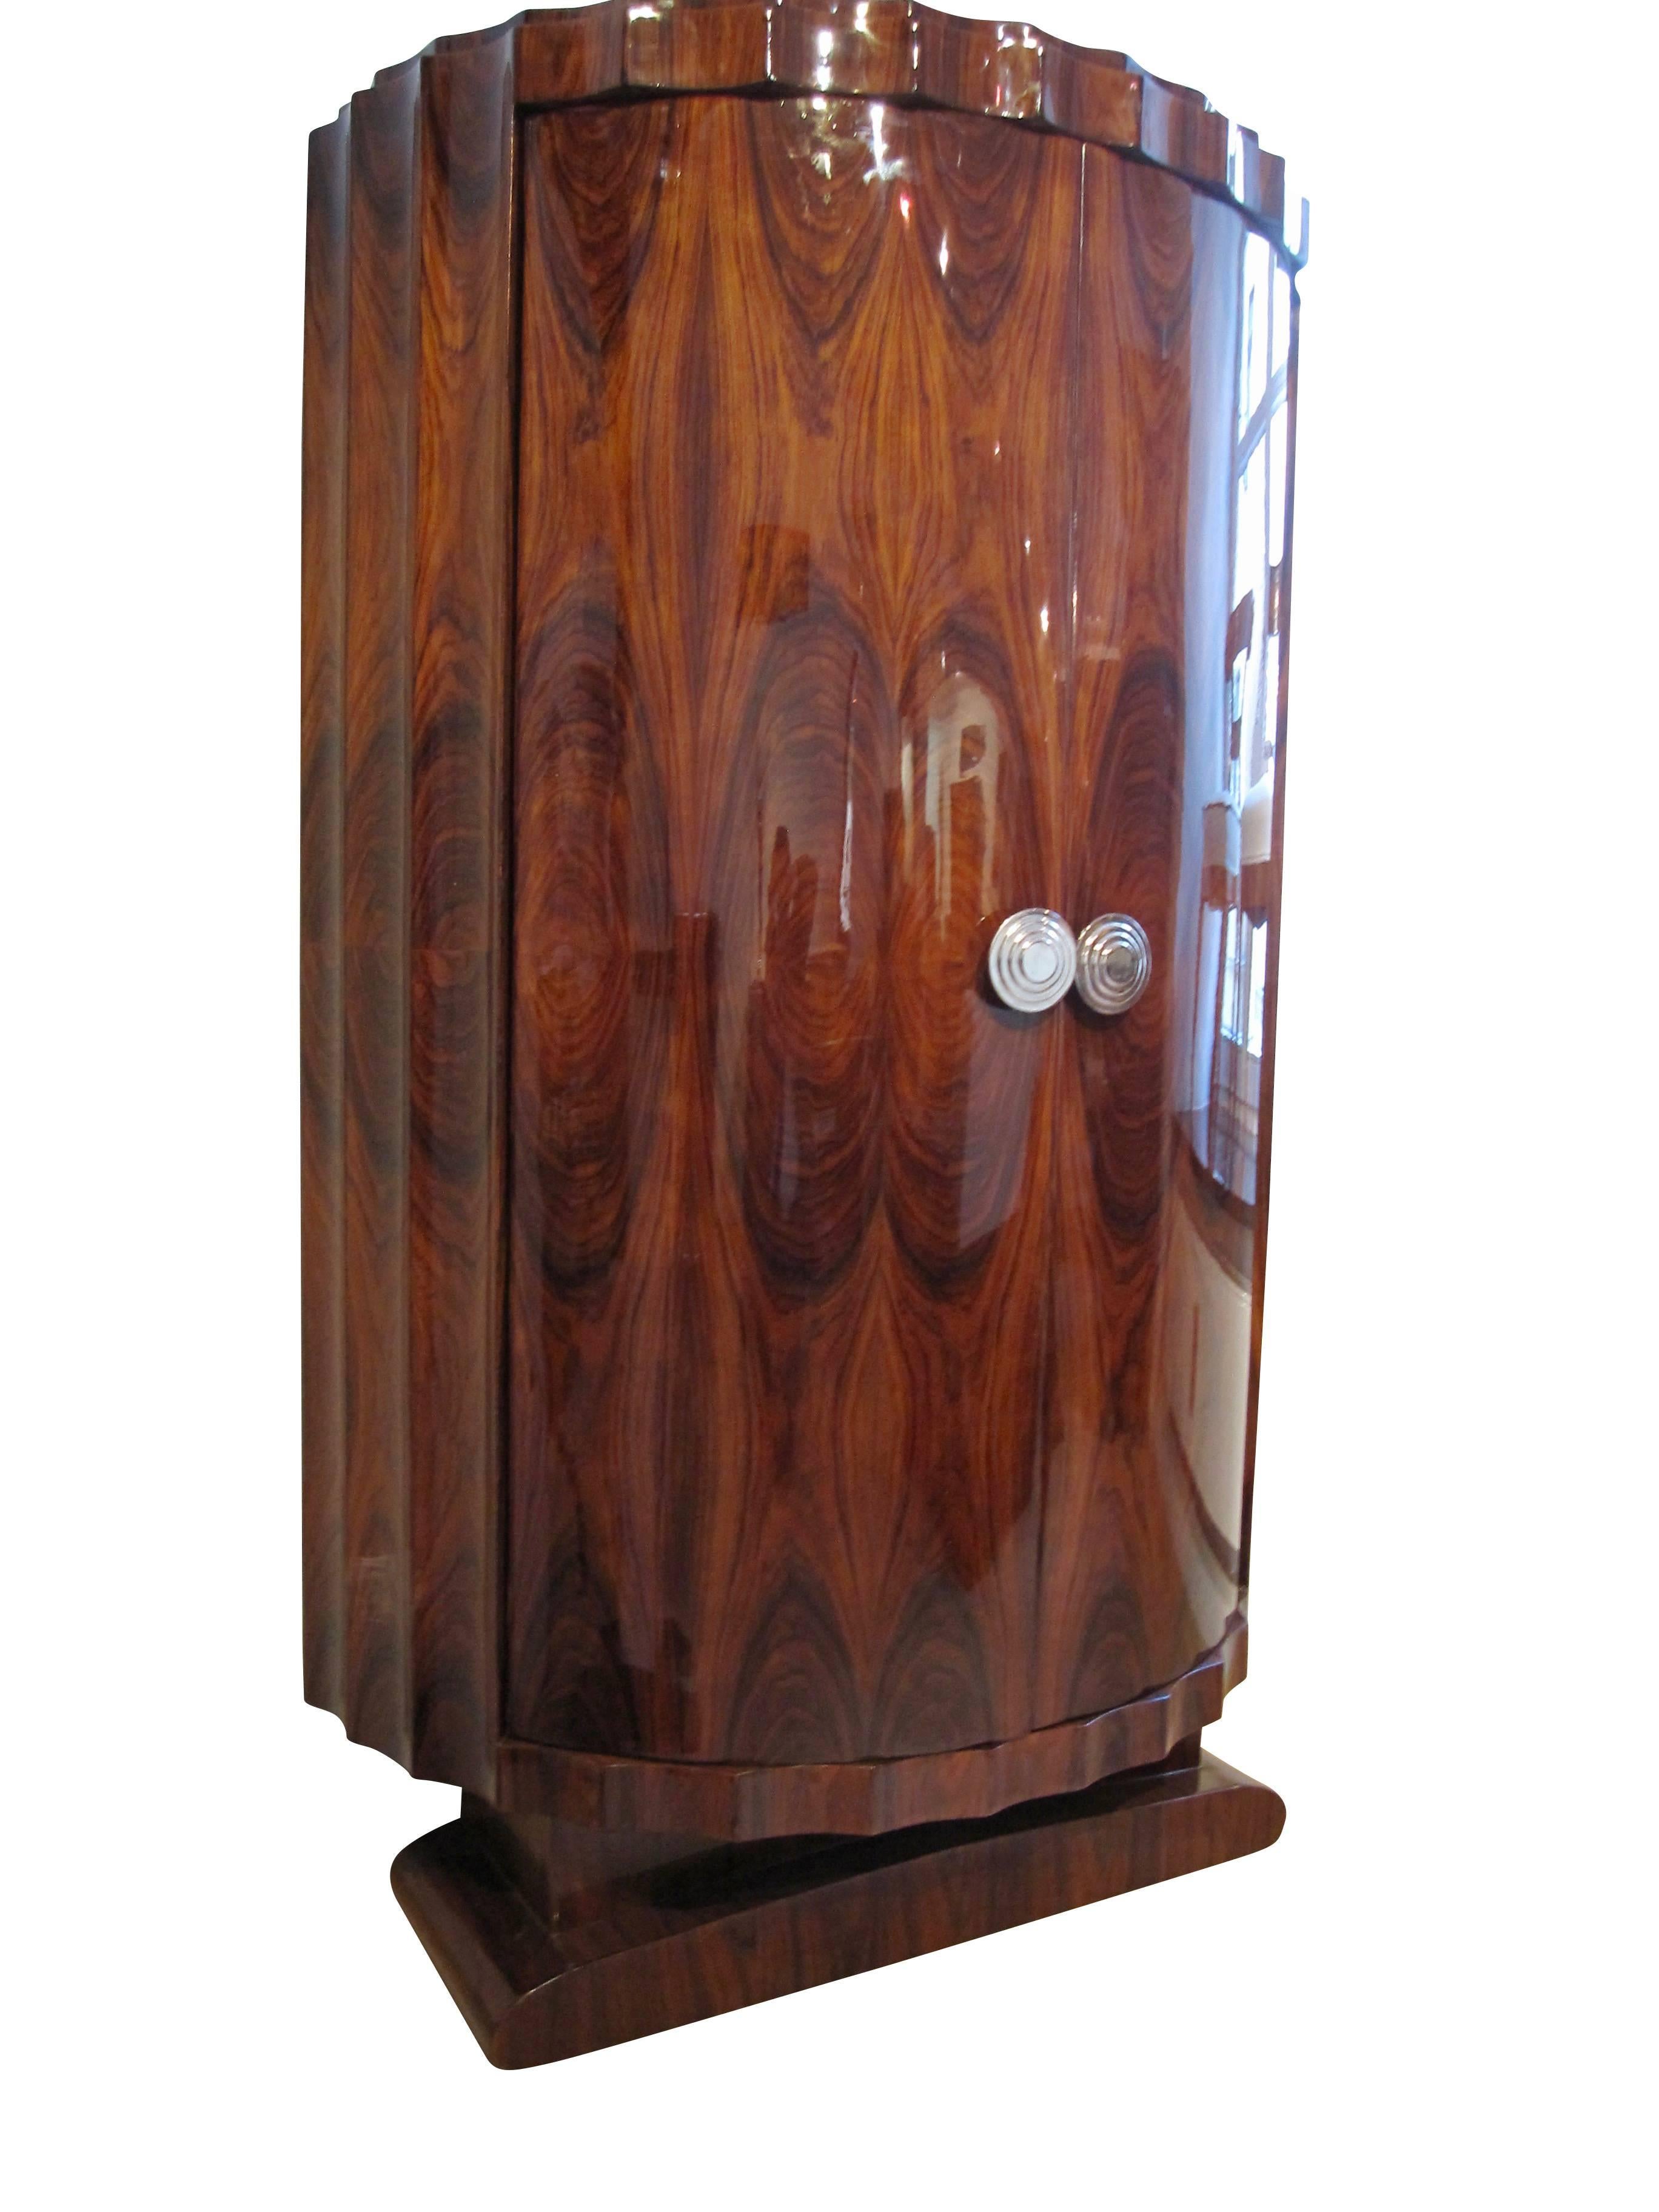 Very special and architecturally interesting demi-lune armoire in Ar Deco Style from France of the 1970s.
Flutet cornice and base with Rosewood (East Indian Palisander) veneer on the in- and outside. Three shelves inside to take out. Beautiful